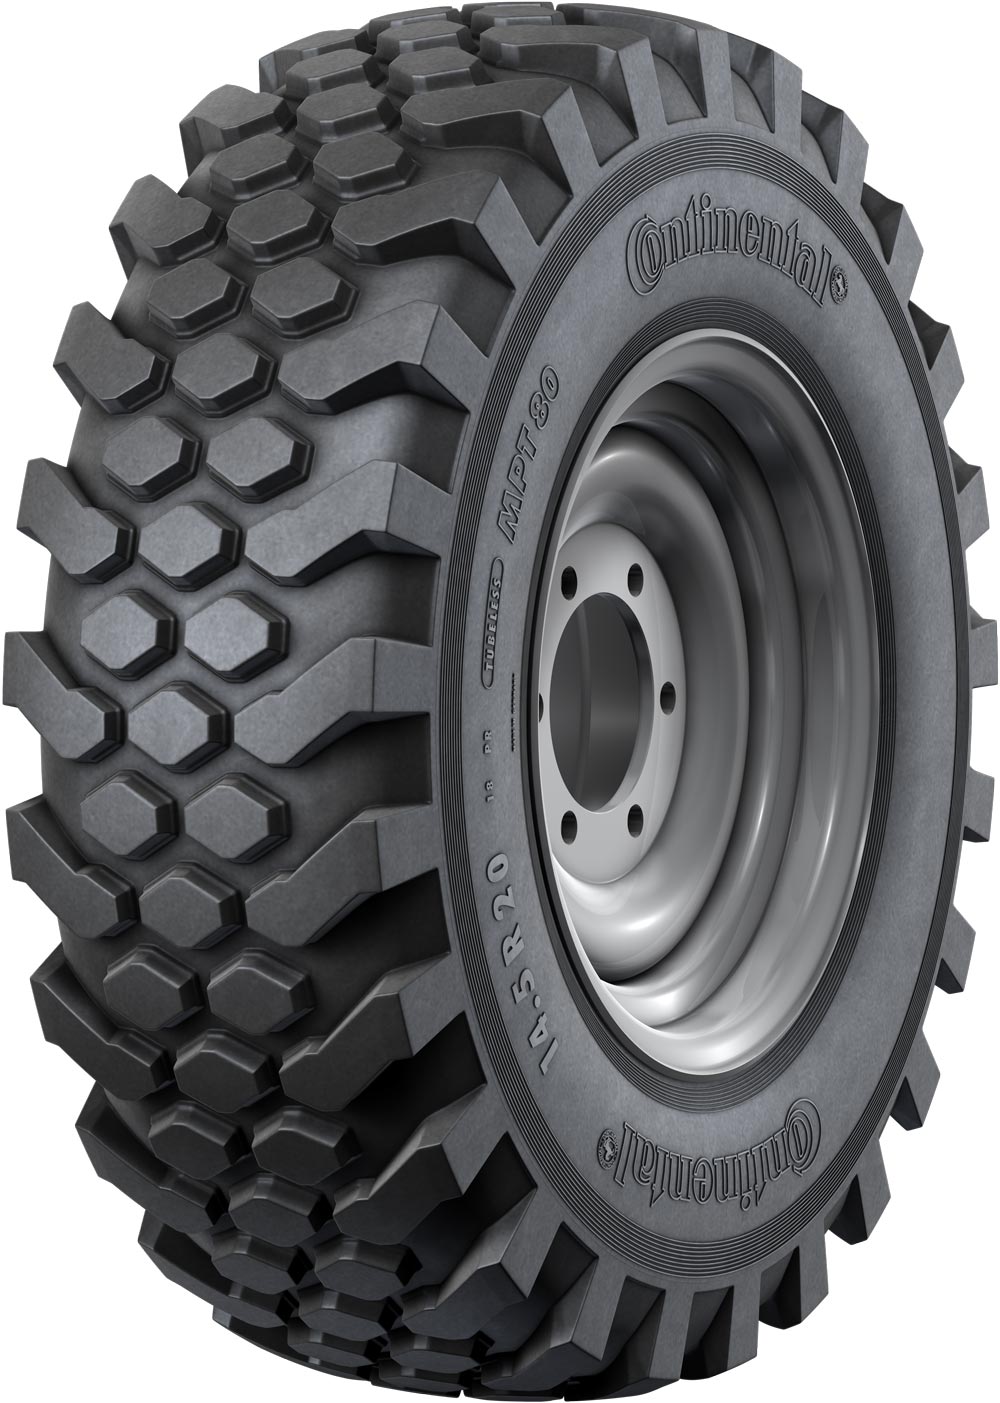 product_type-industrial_tires CONTINENTAL MPT80 14PR TL 10.5 R20 J